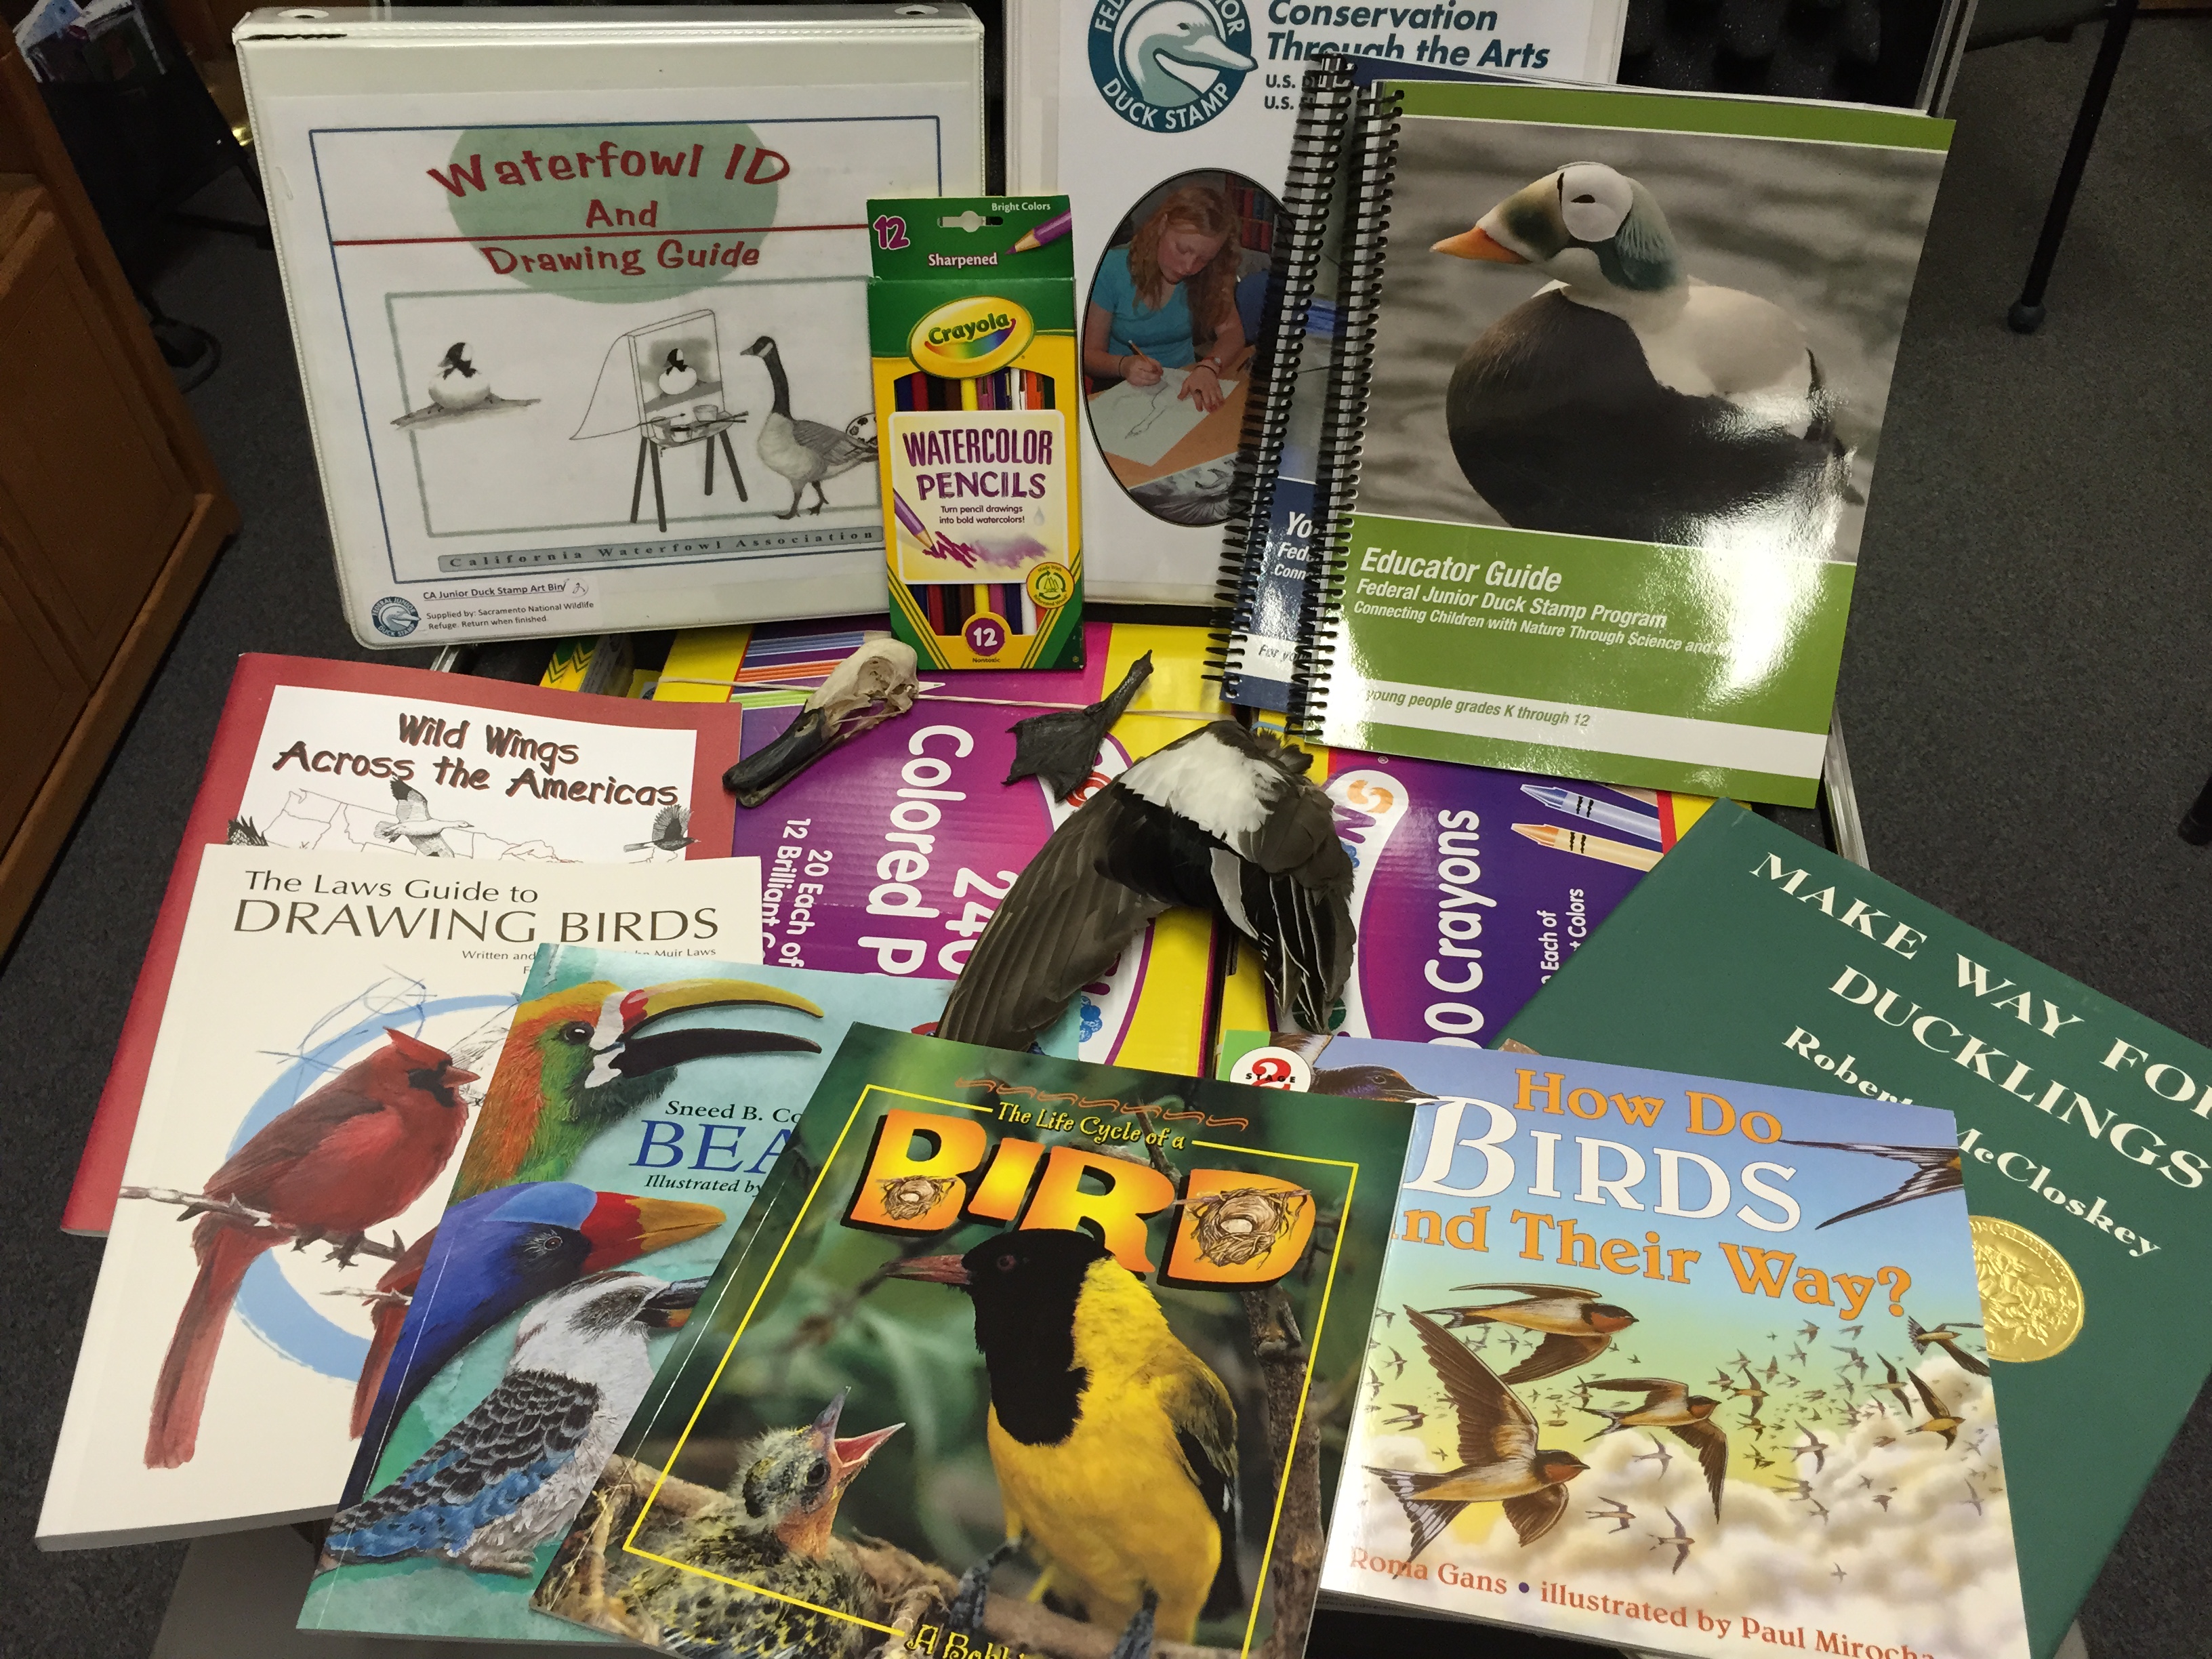 Various books, curriculum, art supplies, and other educational materials used in learning about waterfowl